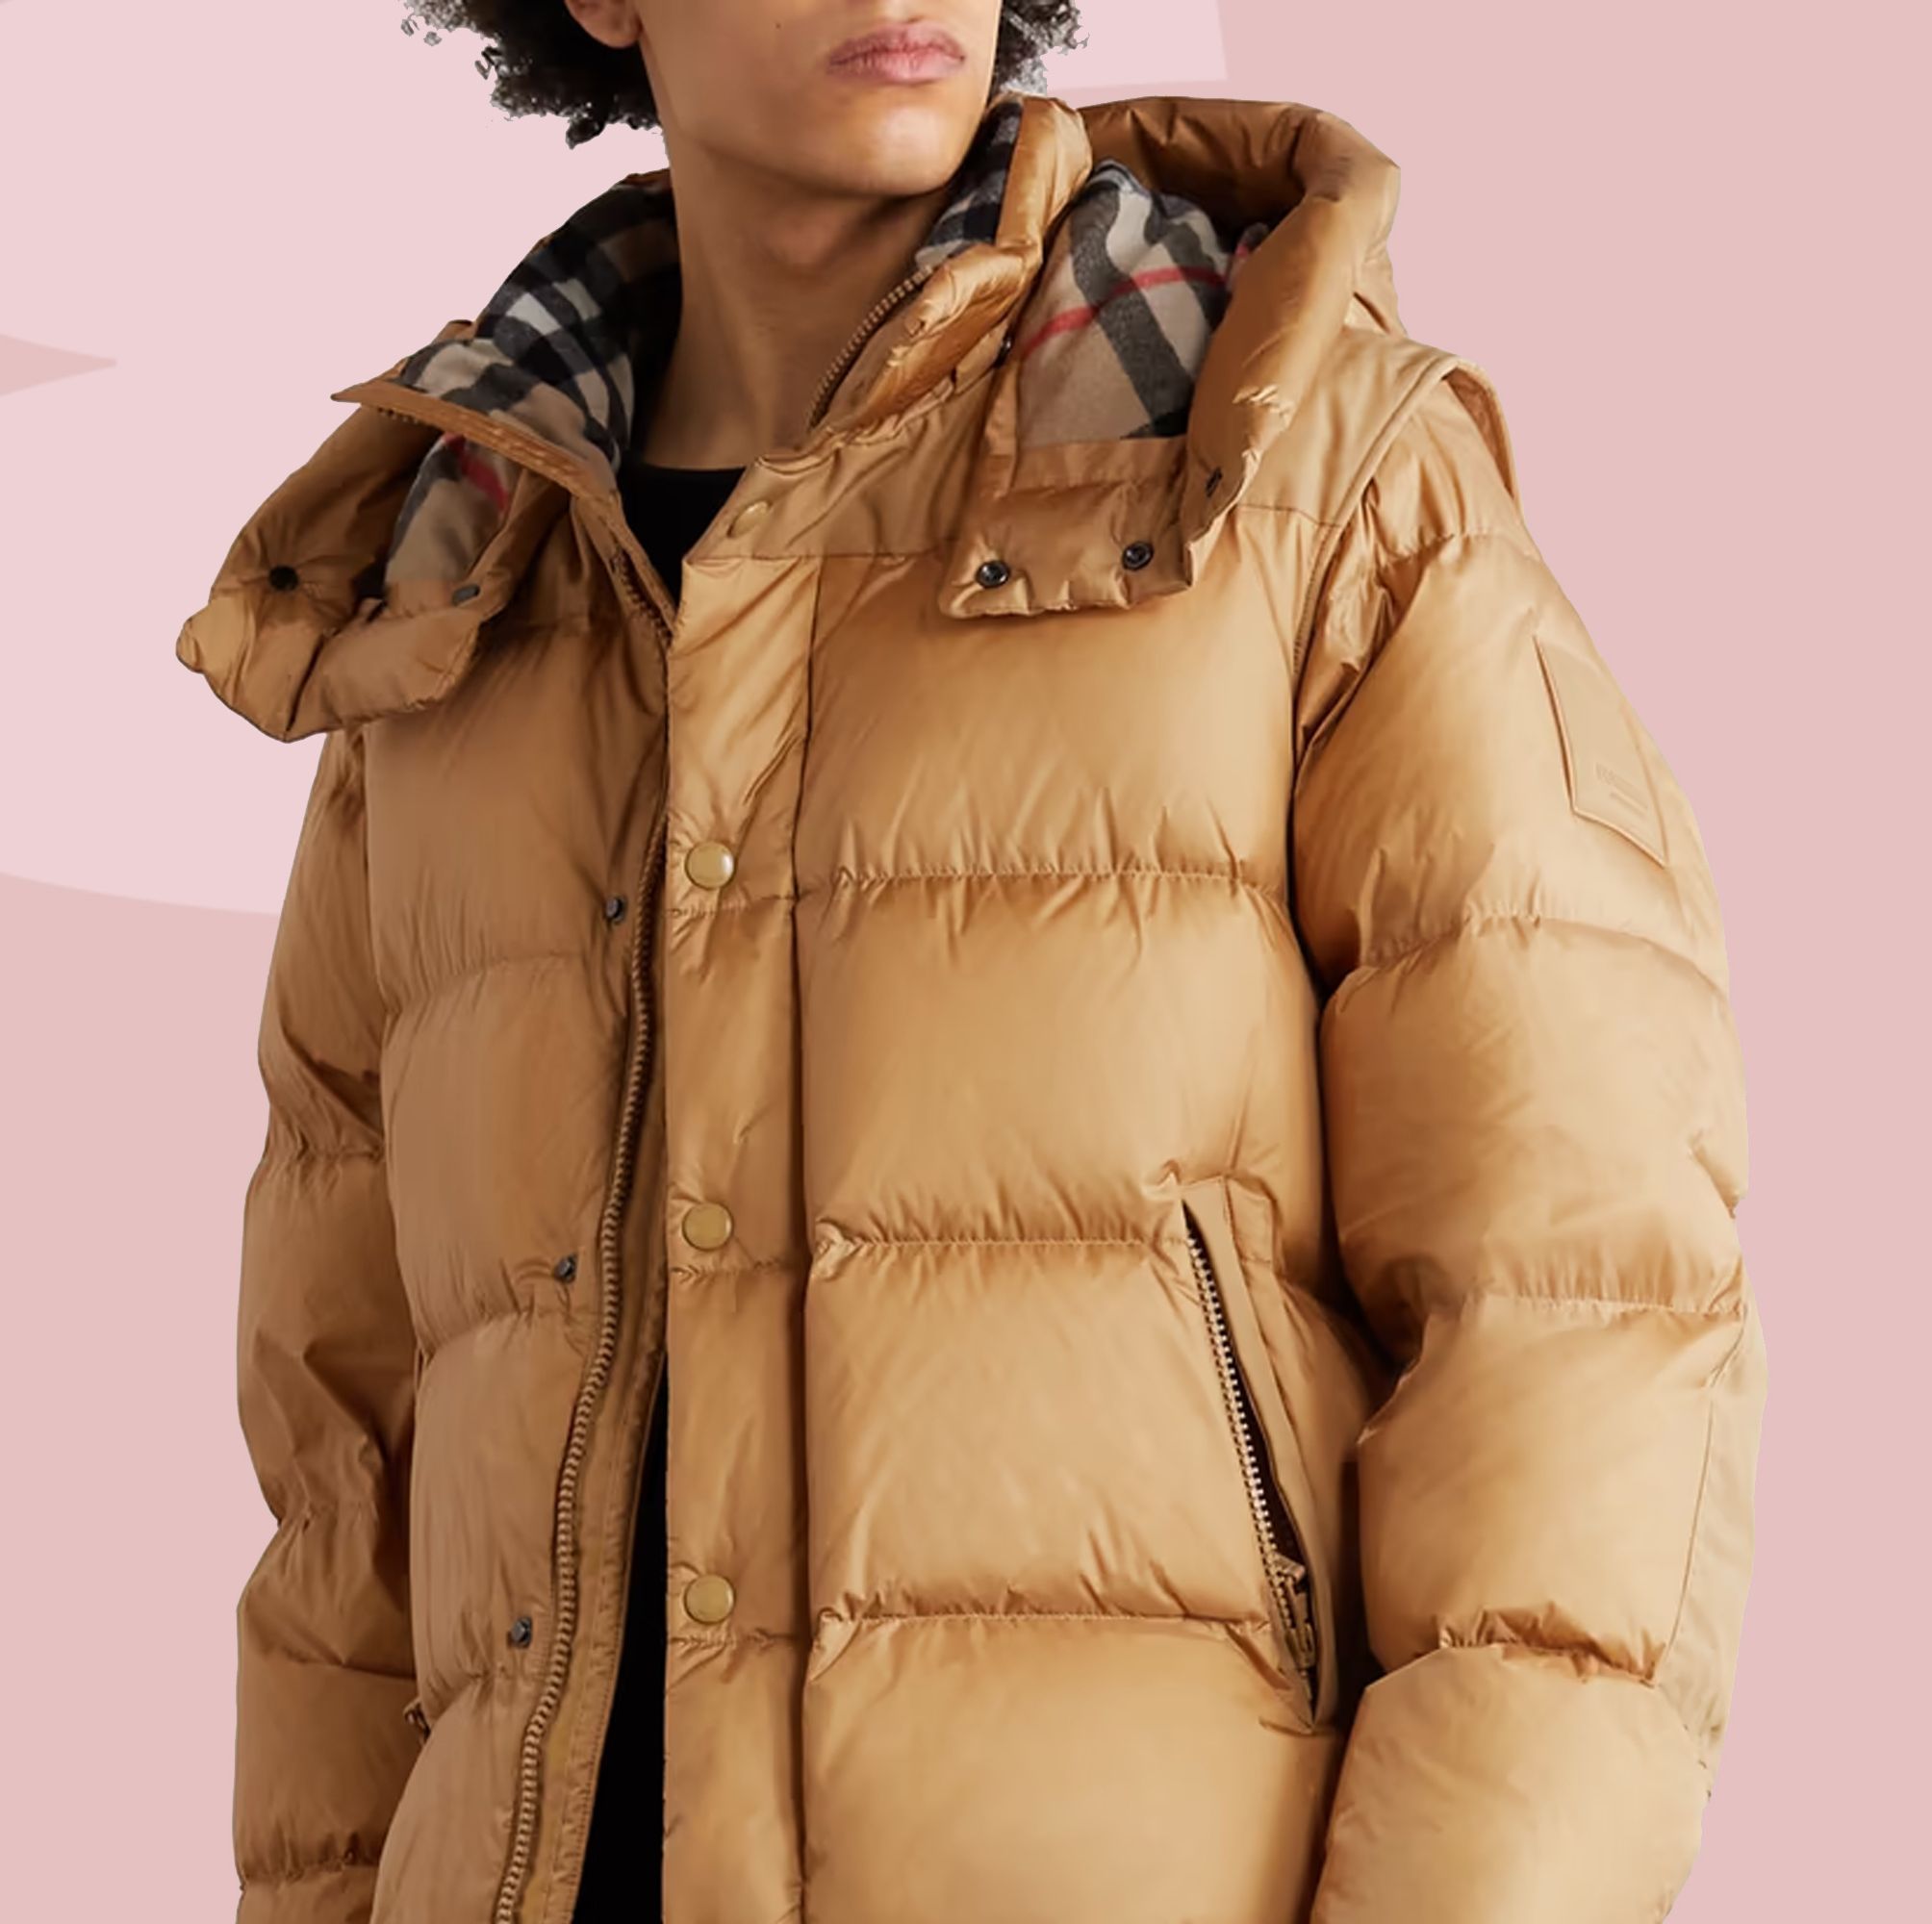 Winter Weather Has Nothing on These Down Jackets